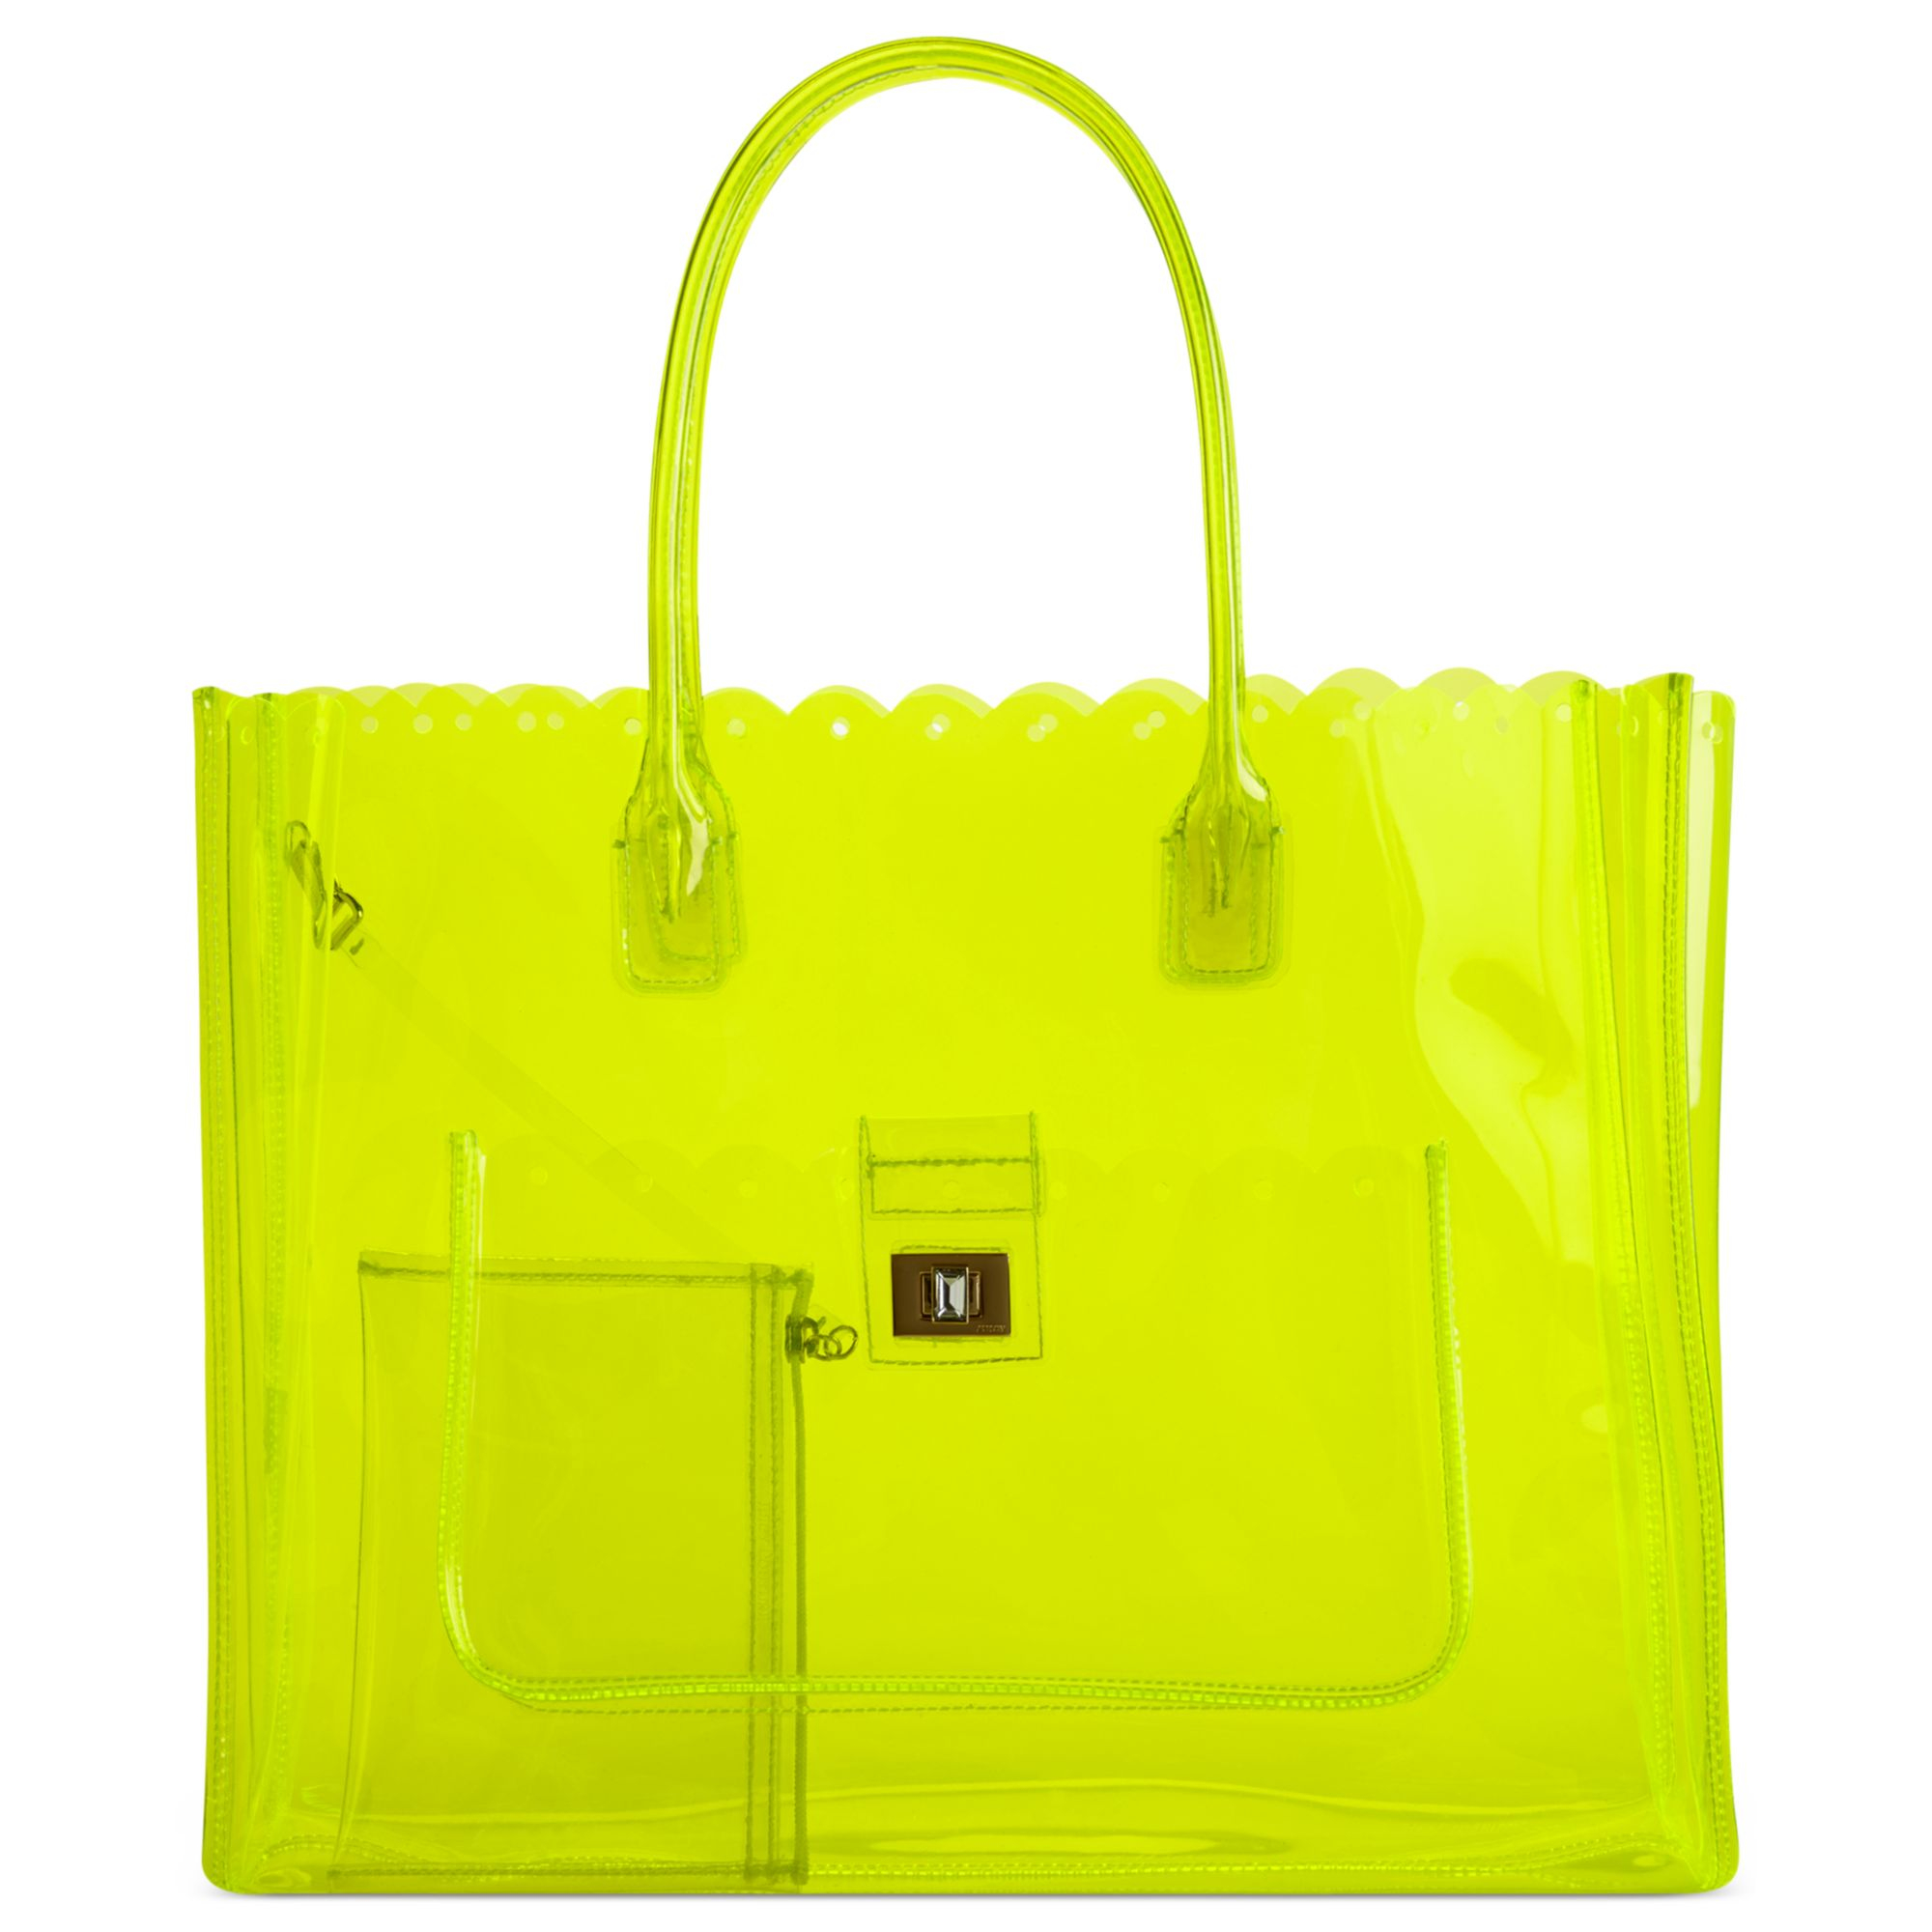 Juicy Couture Silverlake Clear Beach Tote in Yellow | Lyst